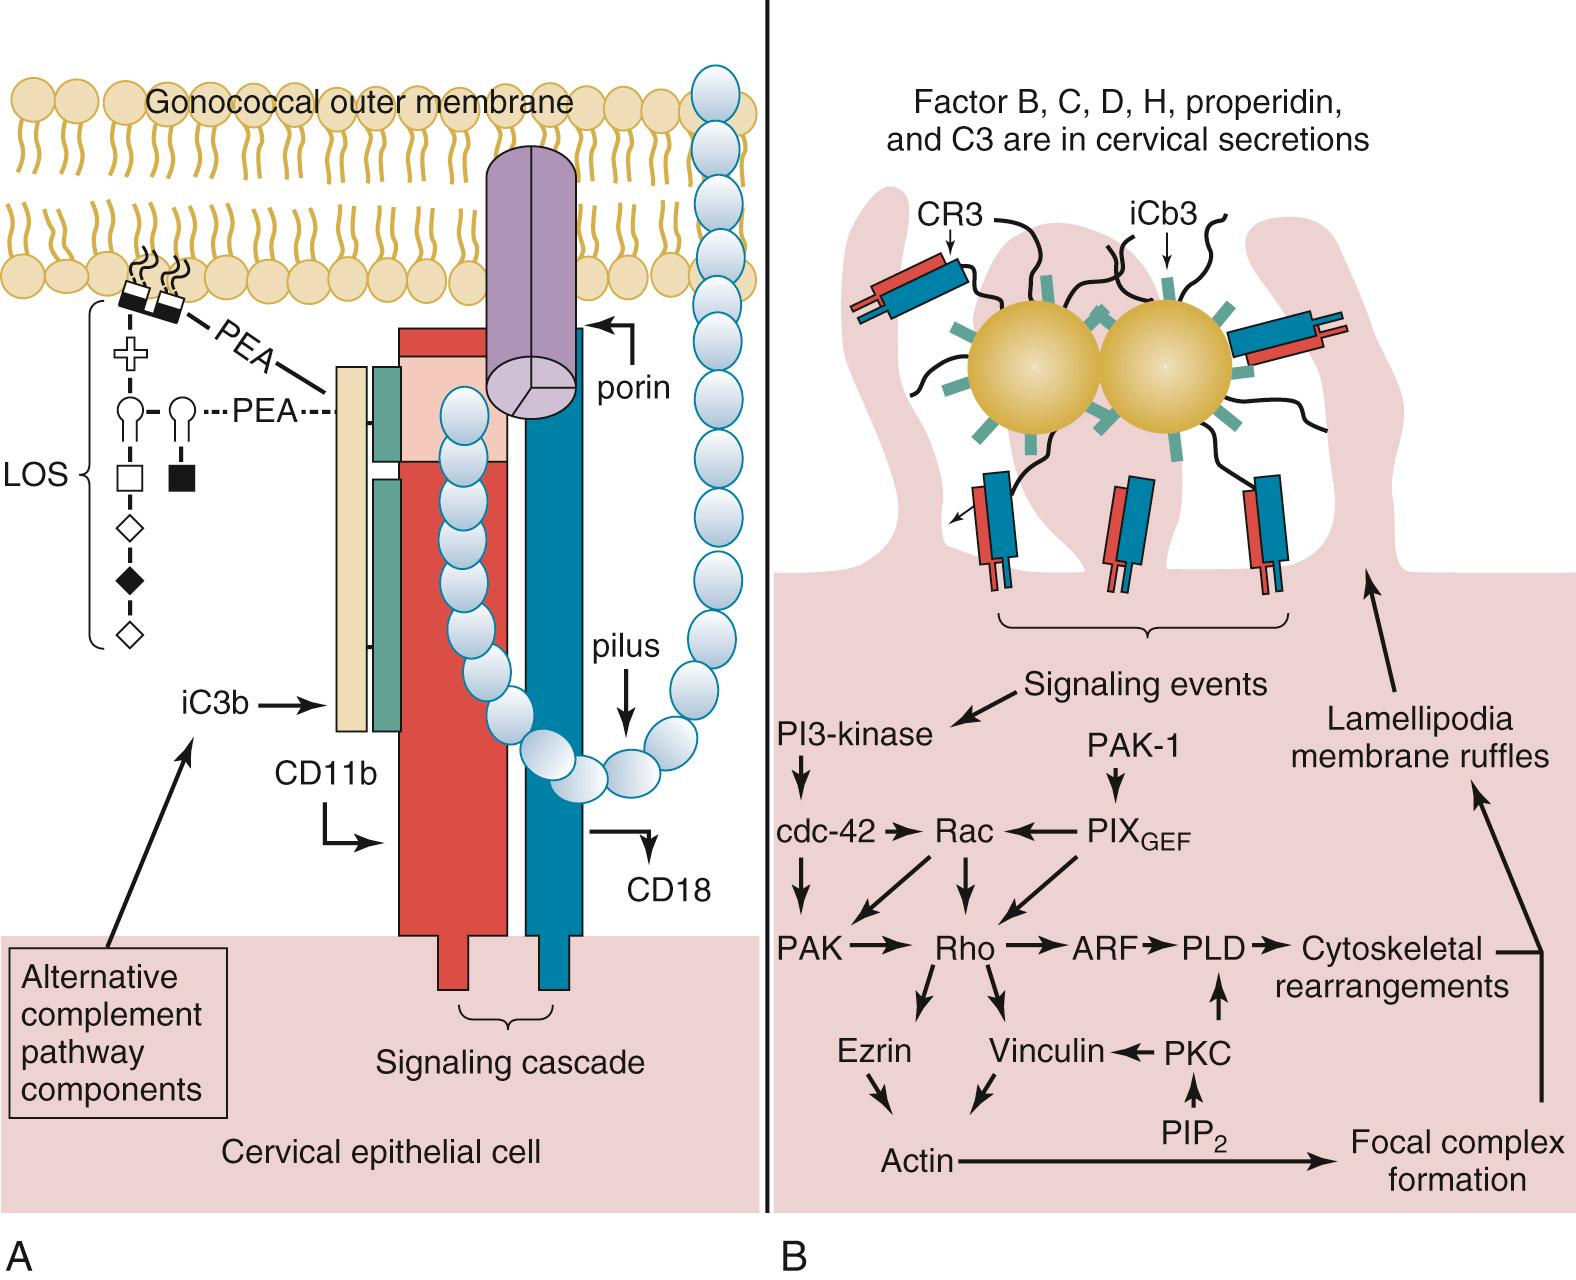 FIG. 212.5, Infection of cervical epithelia by the gonococcus.